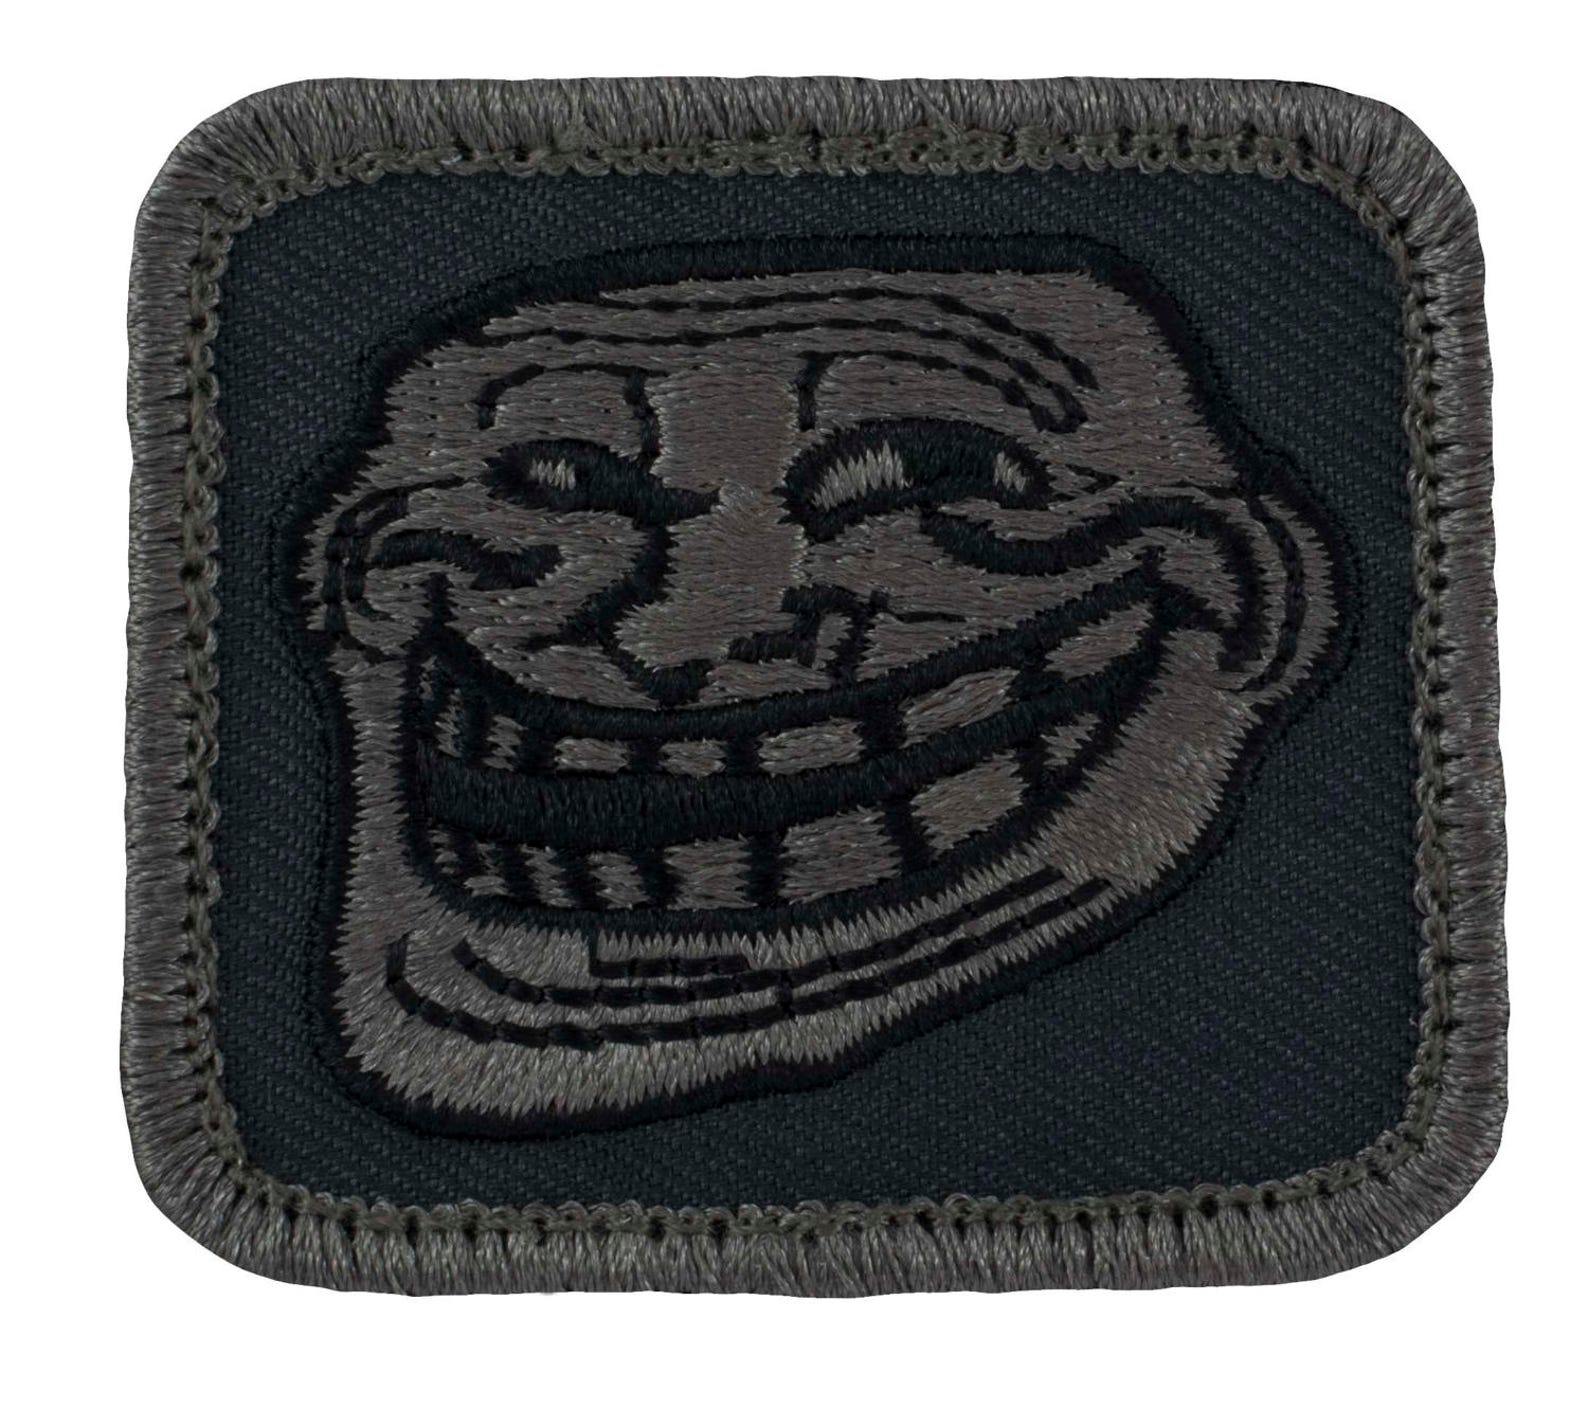 Tactical Troll Face Patch L18 With Hook Fastener Backing | Etsy